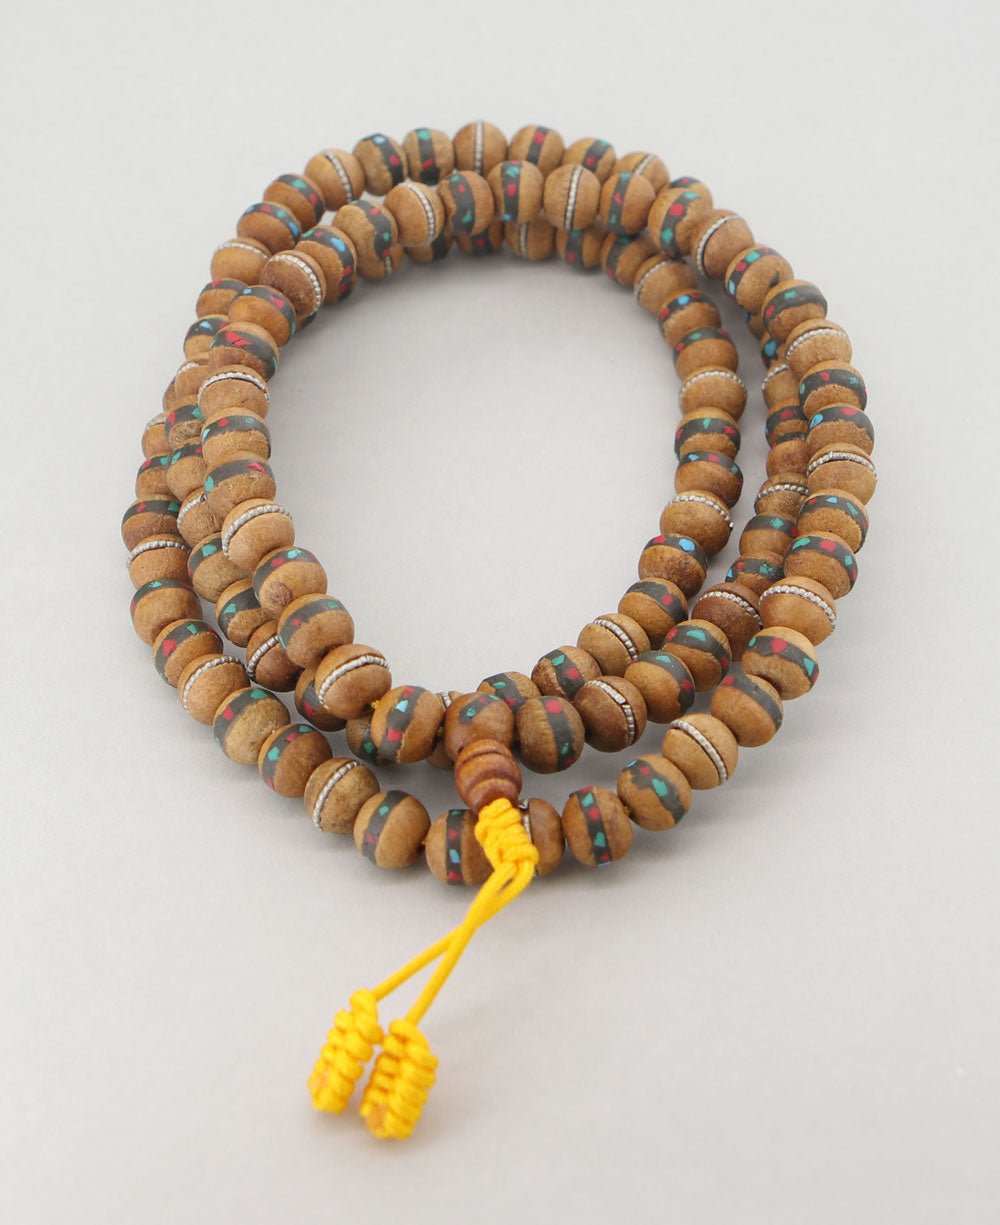 Wooden Mala with Coral and Turquoise Inlays, 108 Beads - Prayer Beads